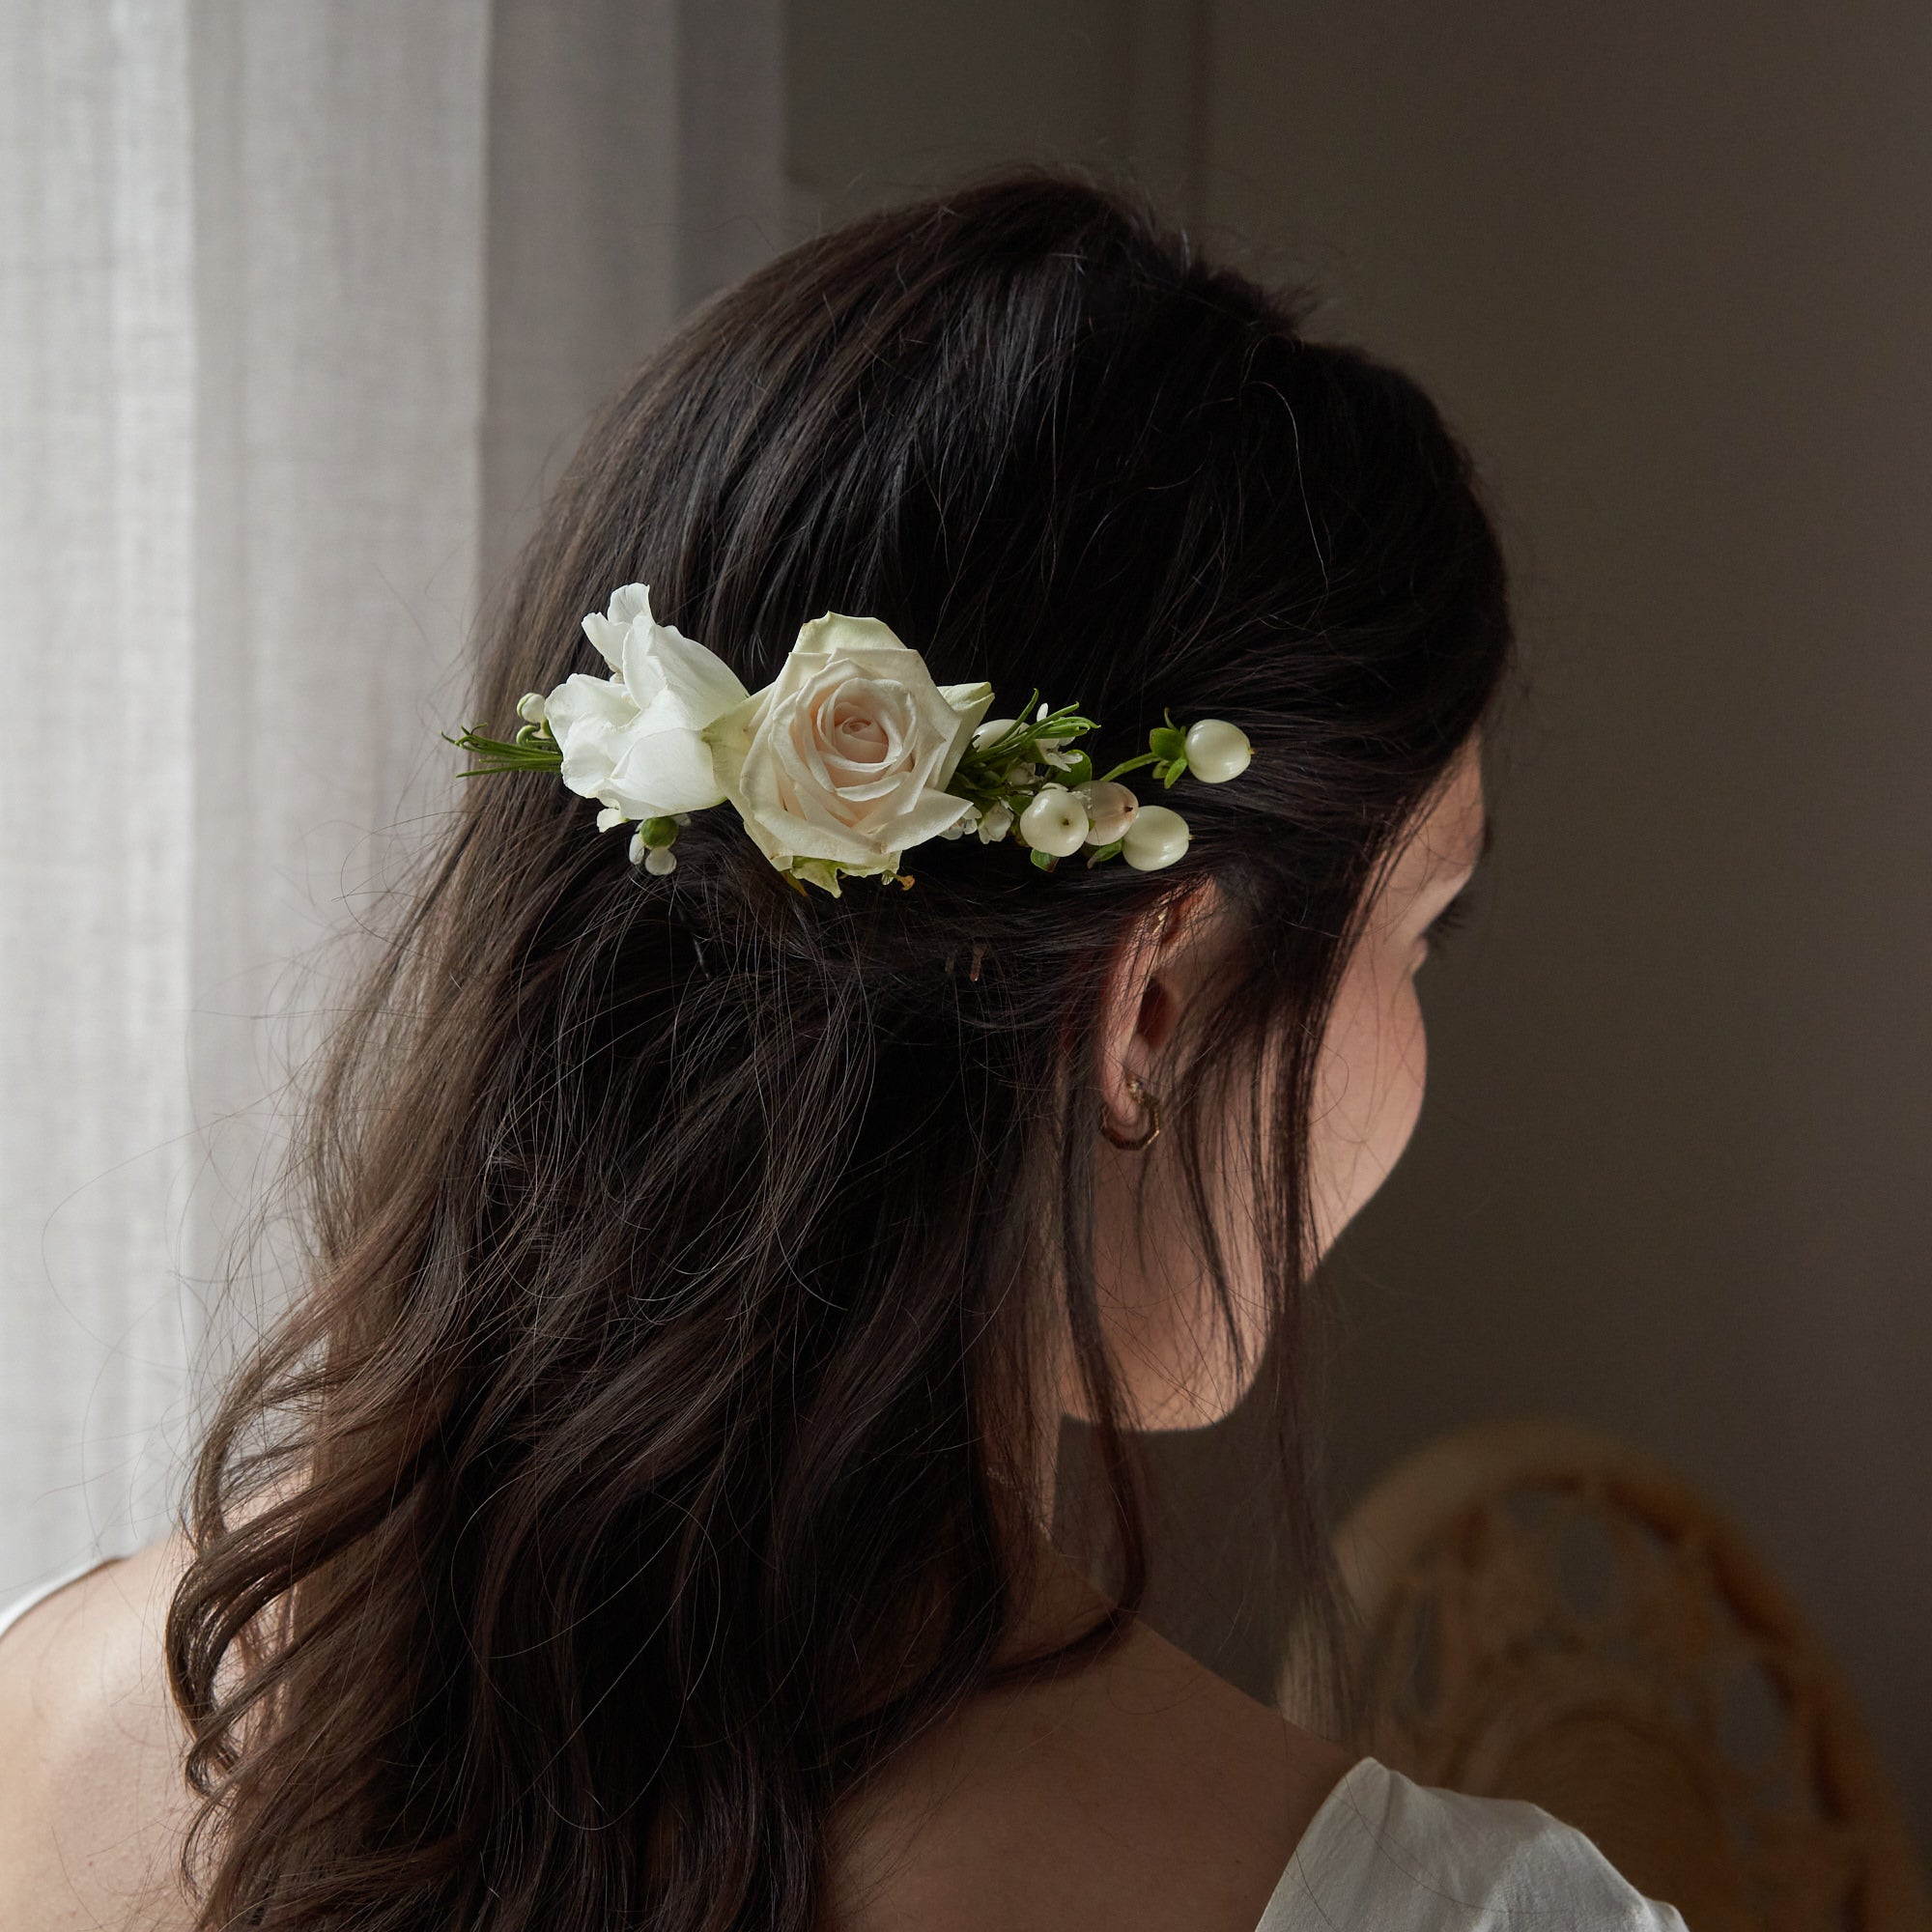 classic white flower hair comb with white and off white seasonal flowers and fresh foliage